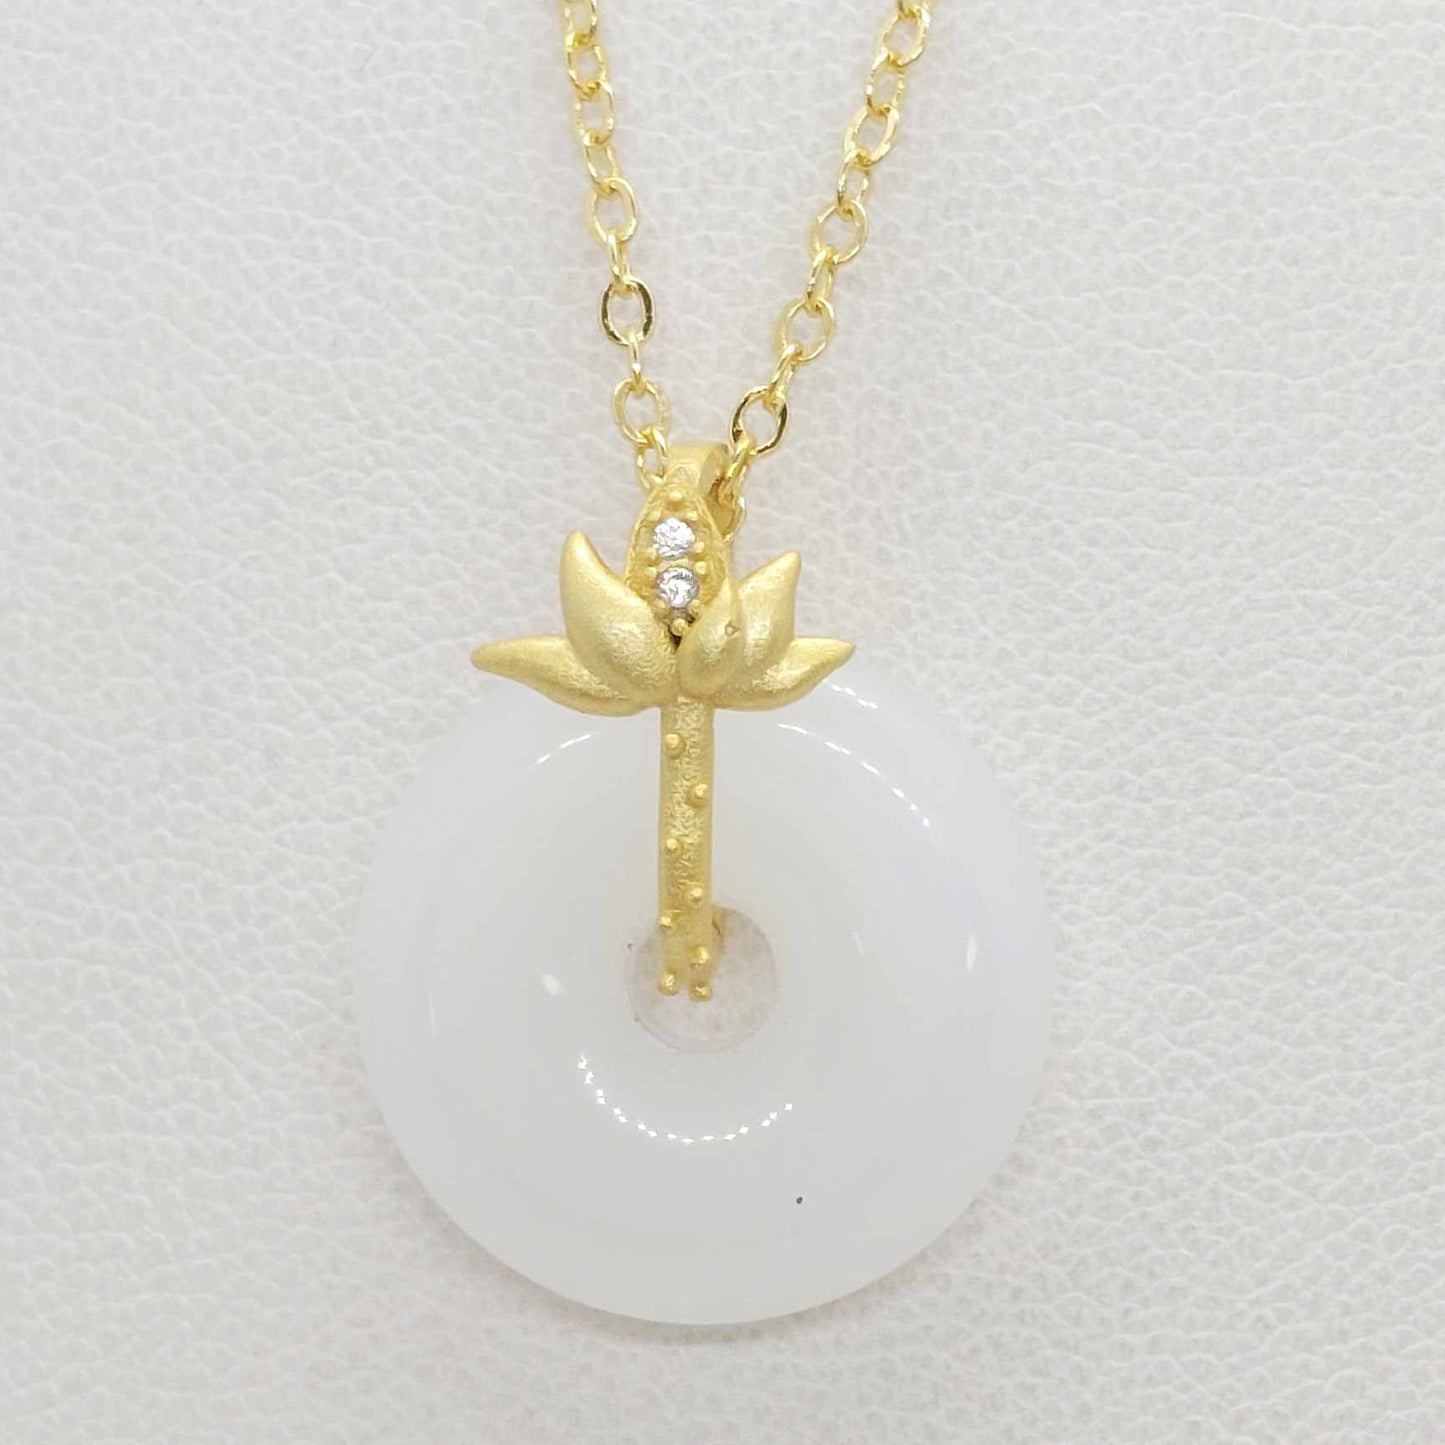 Natural White Hetian Jade Donut Pendant with Gold Plated Stainless Steel Chain Necklace